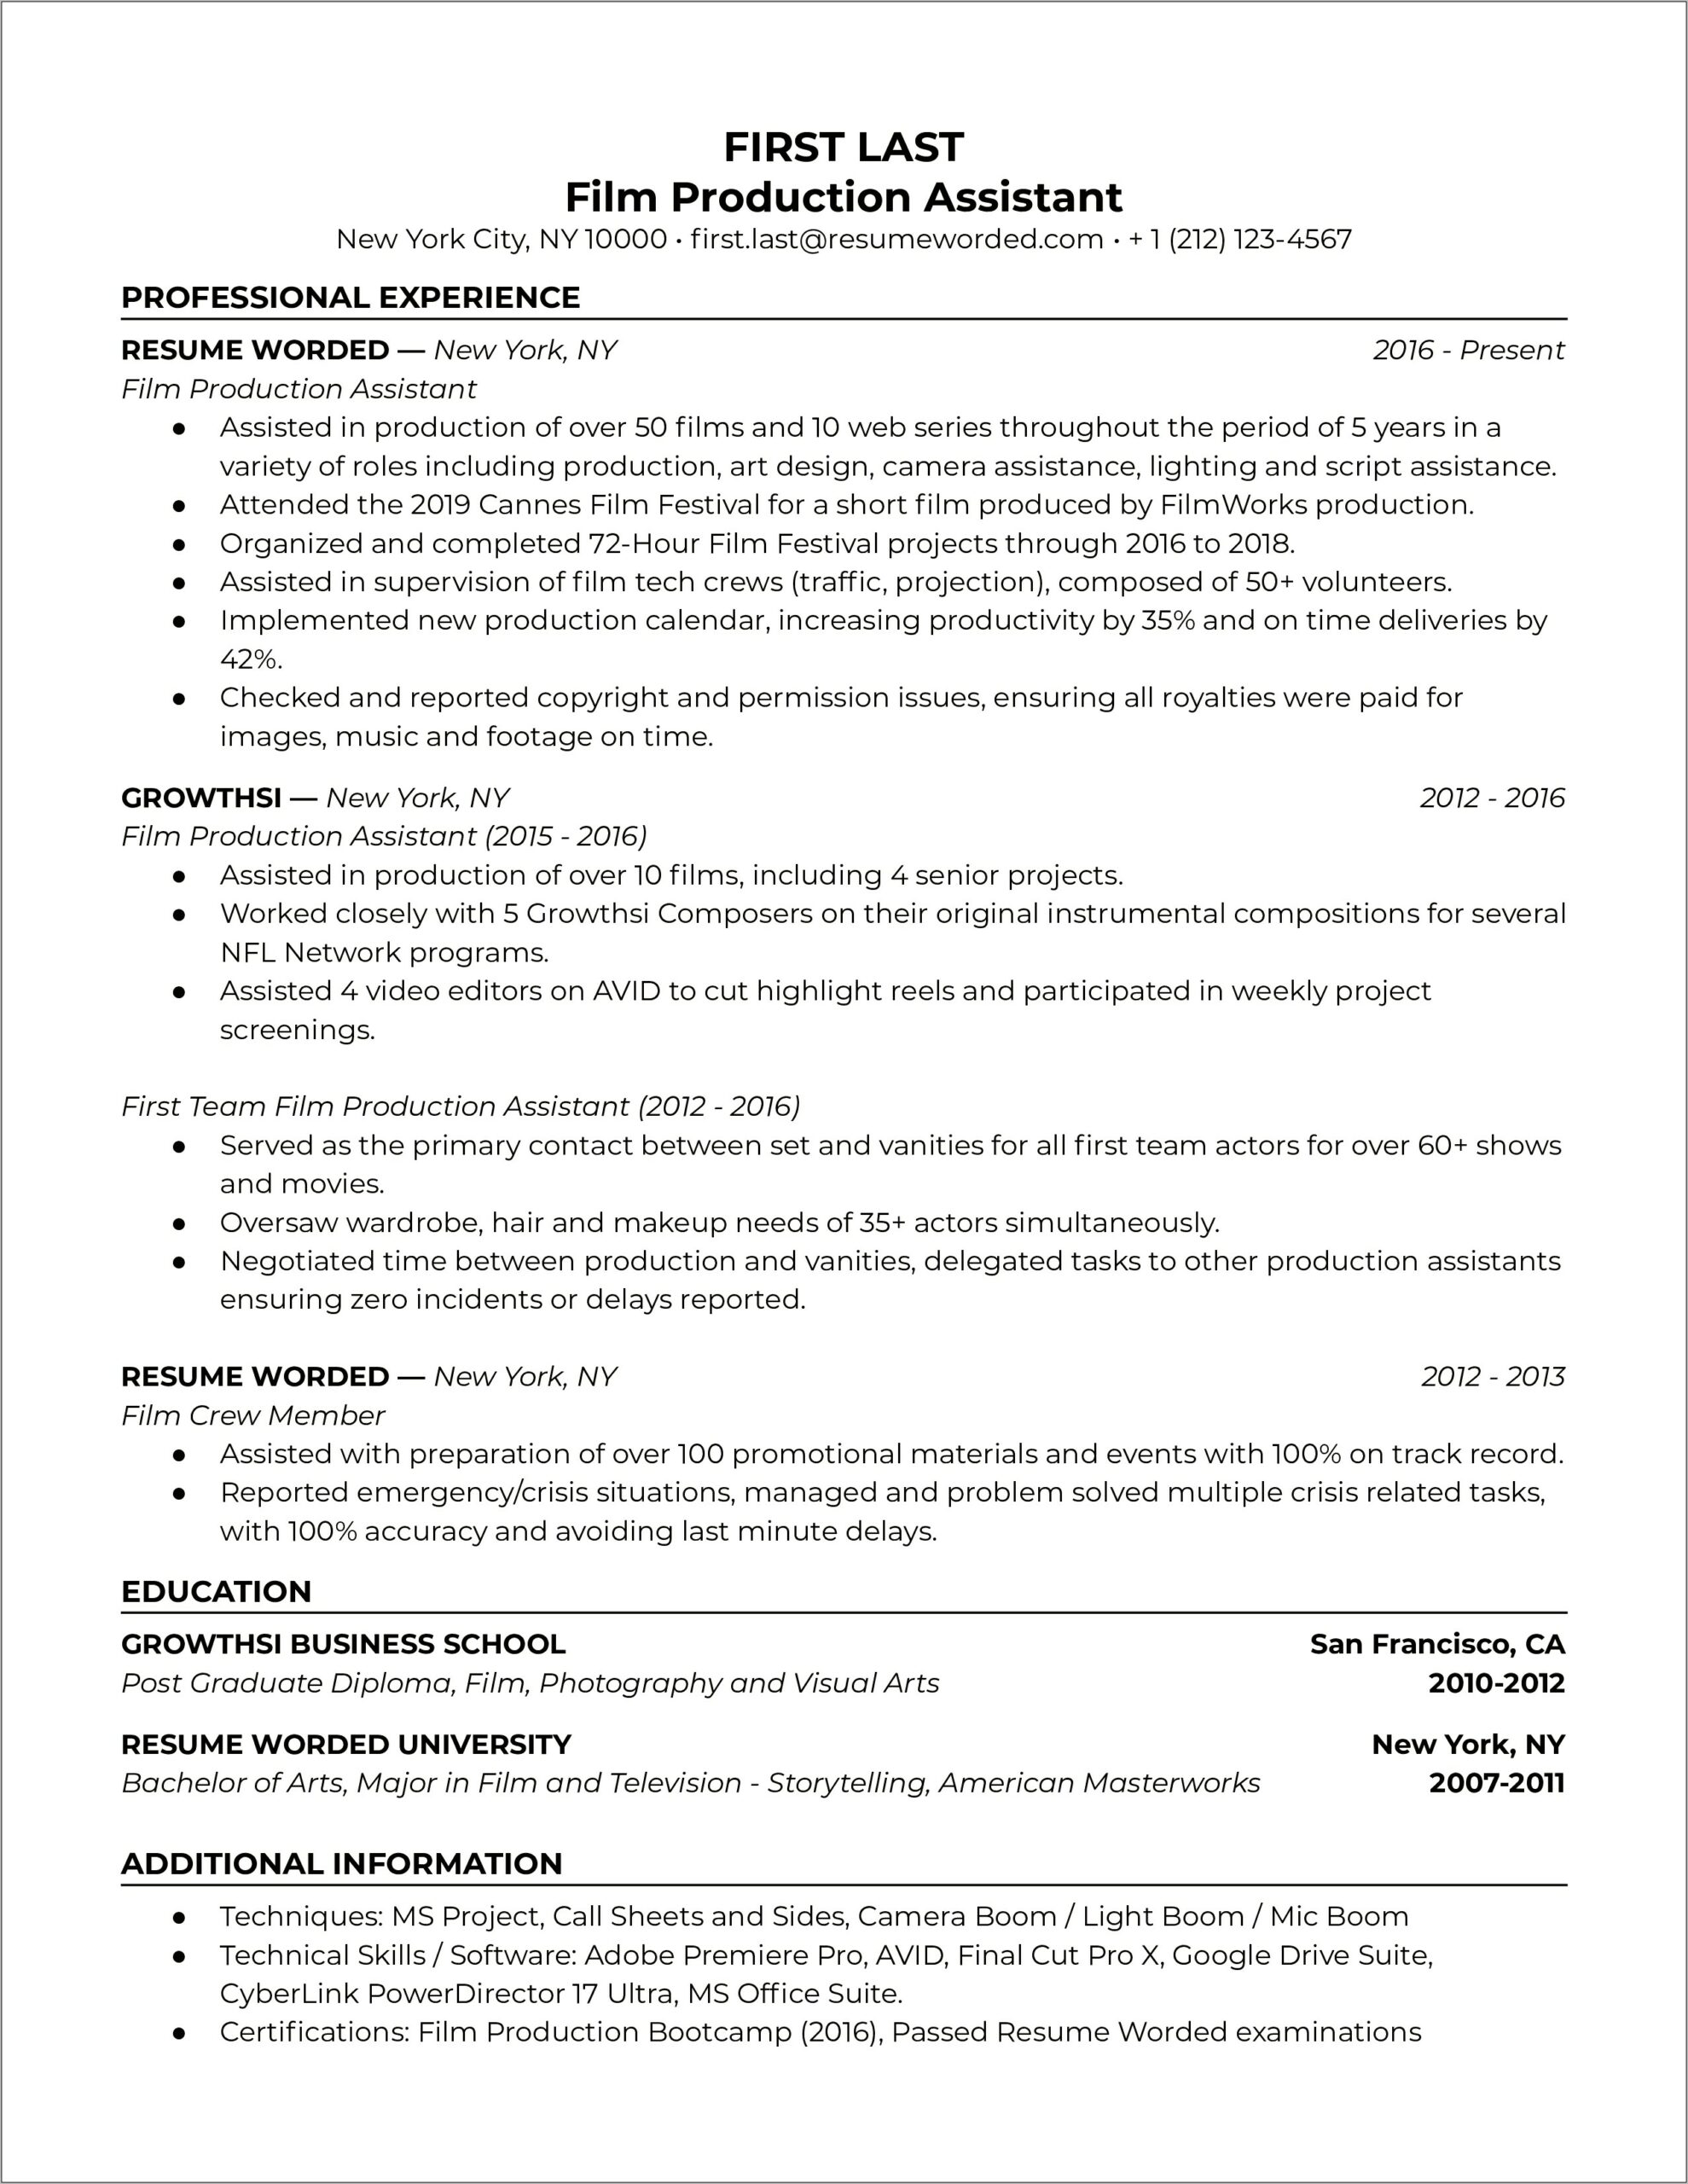 Film Production Assistant Resume Example